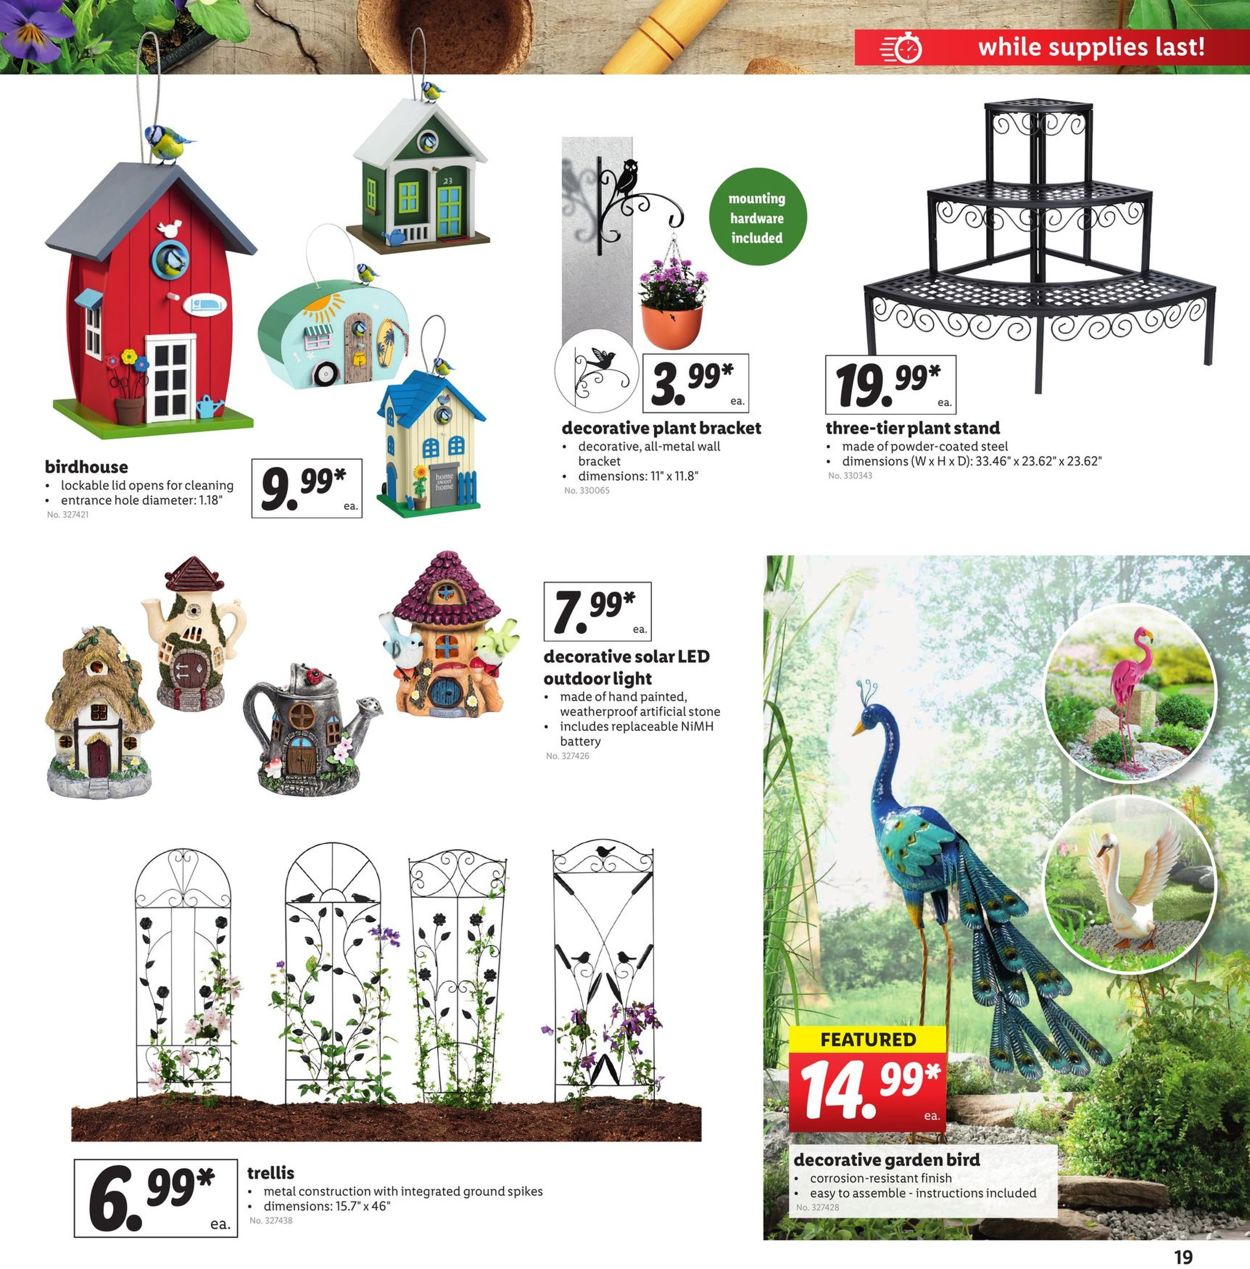 Lidl weekly ad 03/18 03/24/2020 [19] - frequent-ads.com